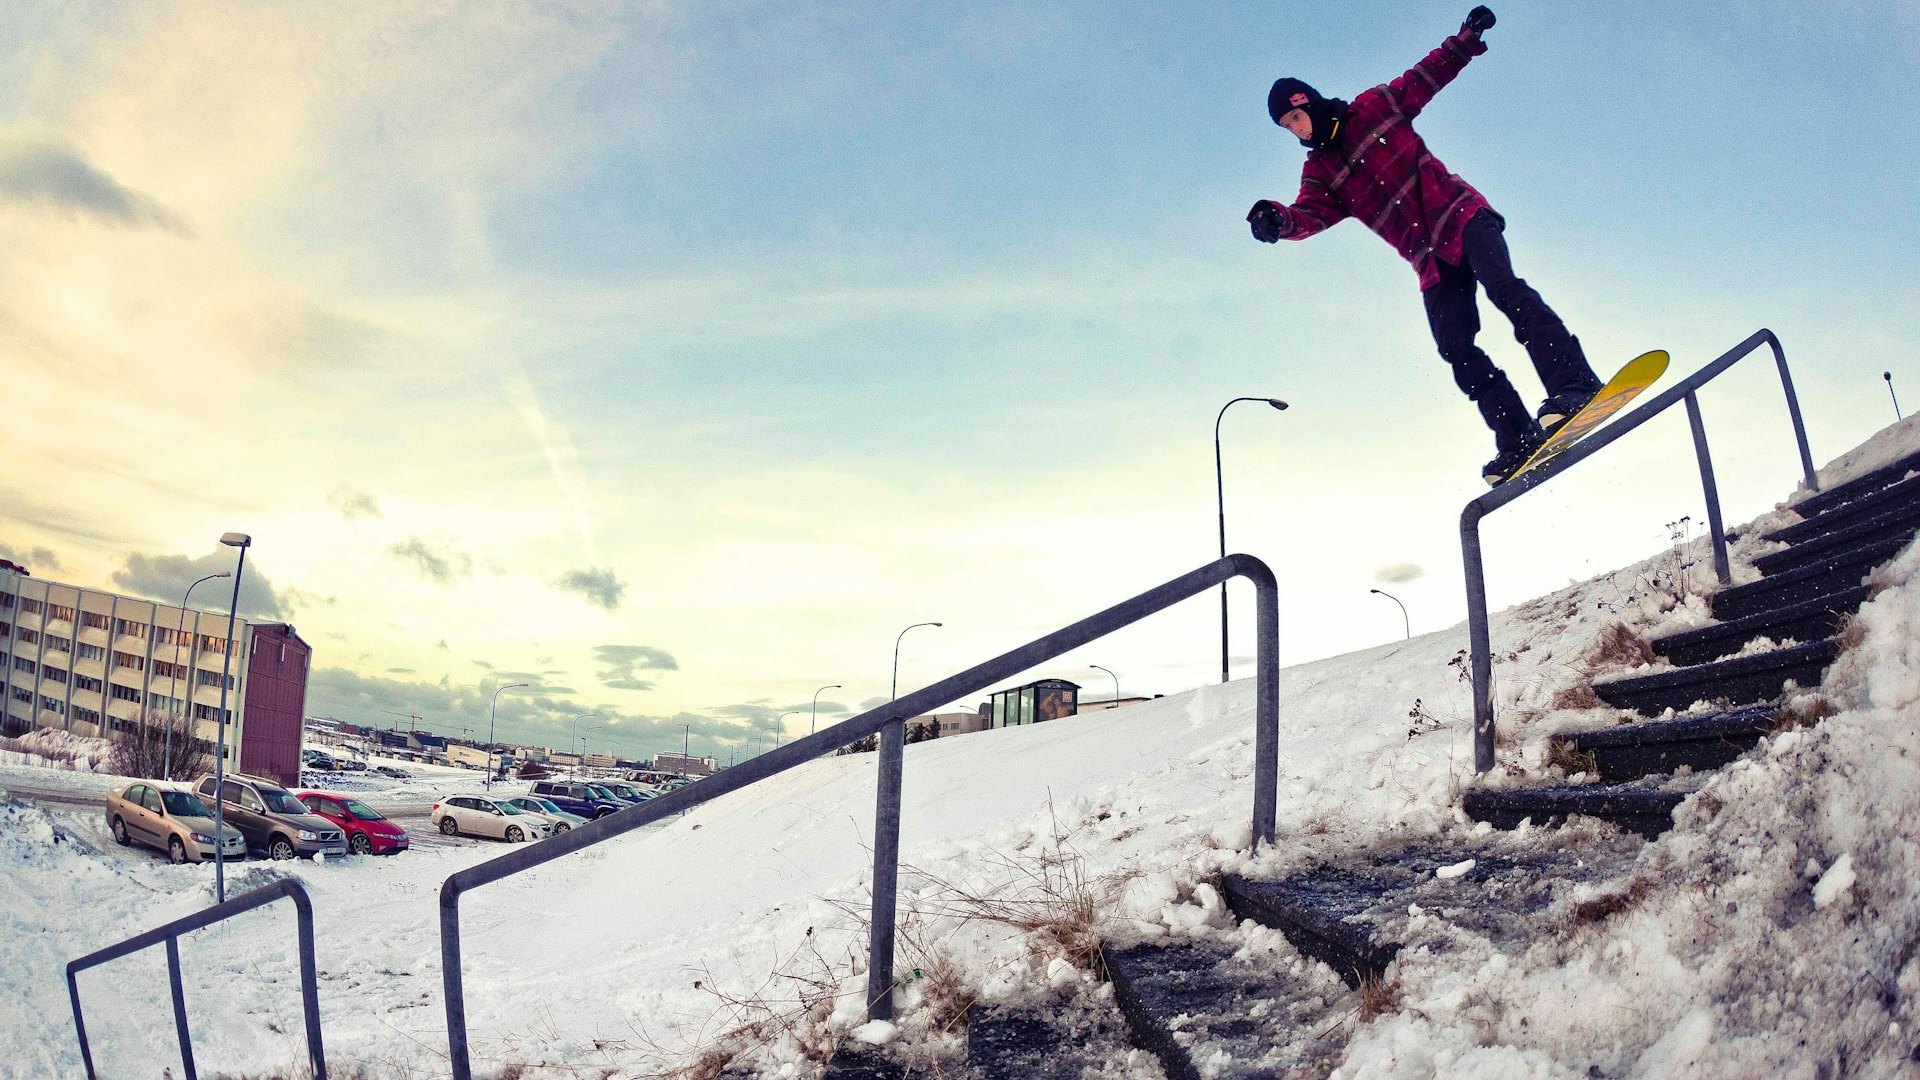 Snowboarder Benny Urban on fear, freedom and taking to the streets